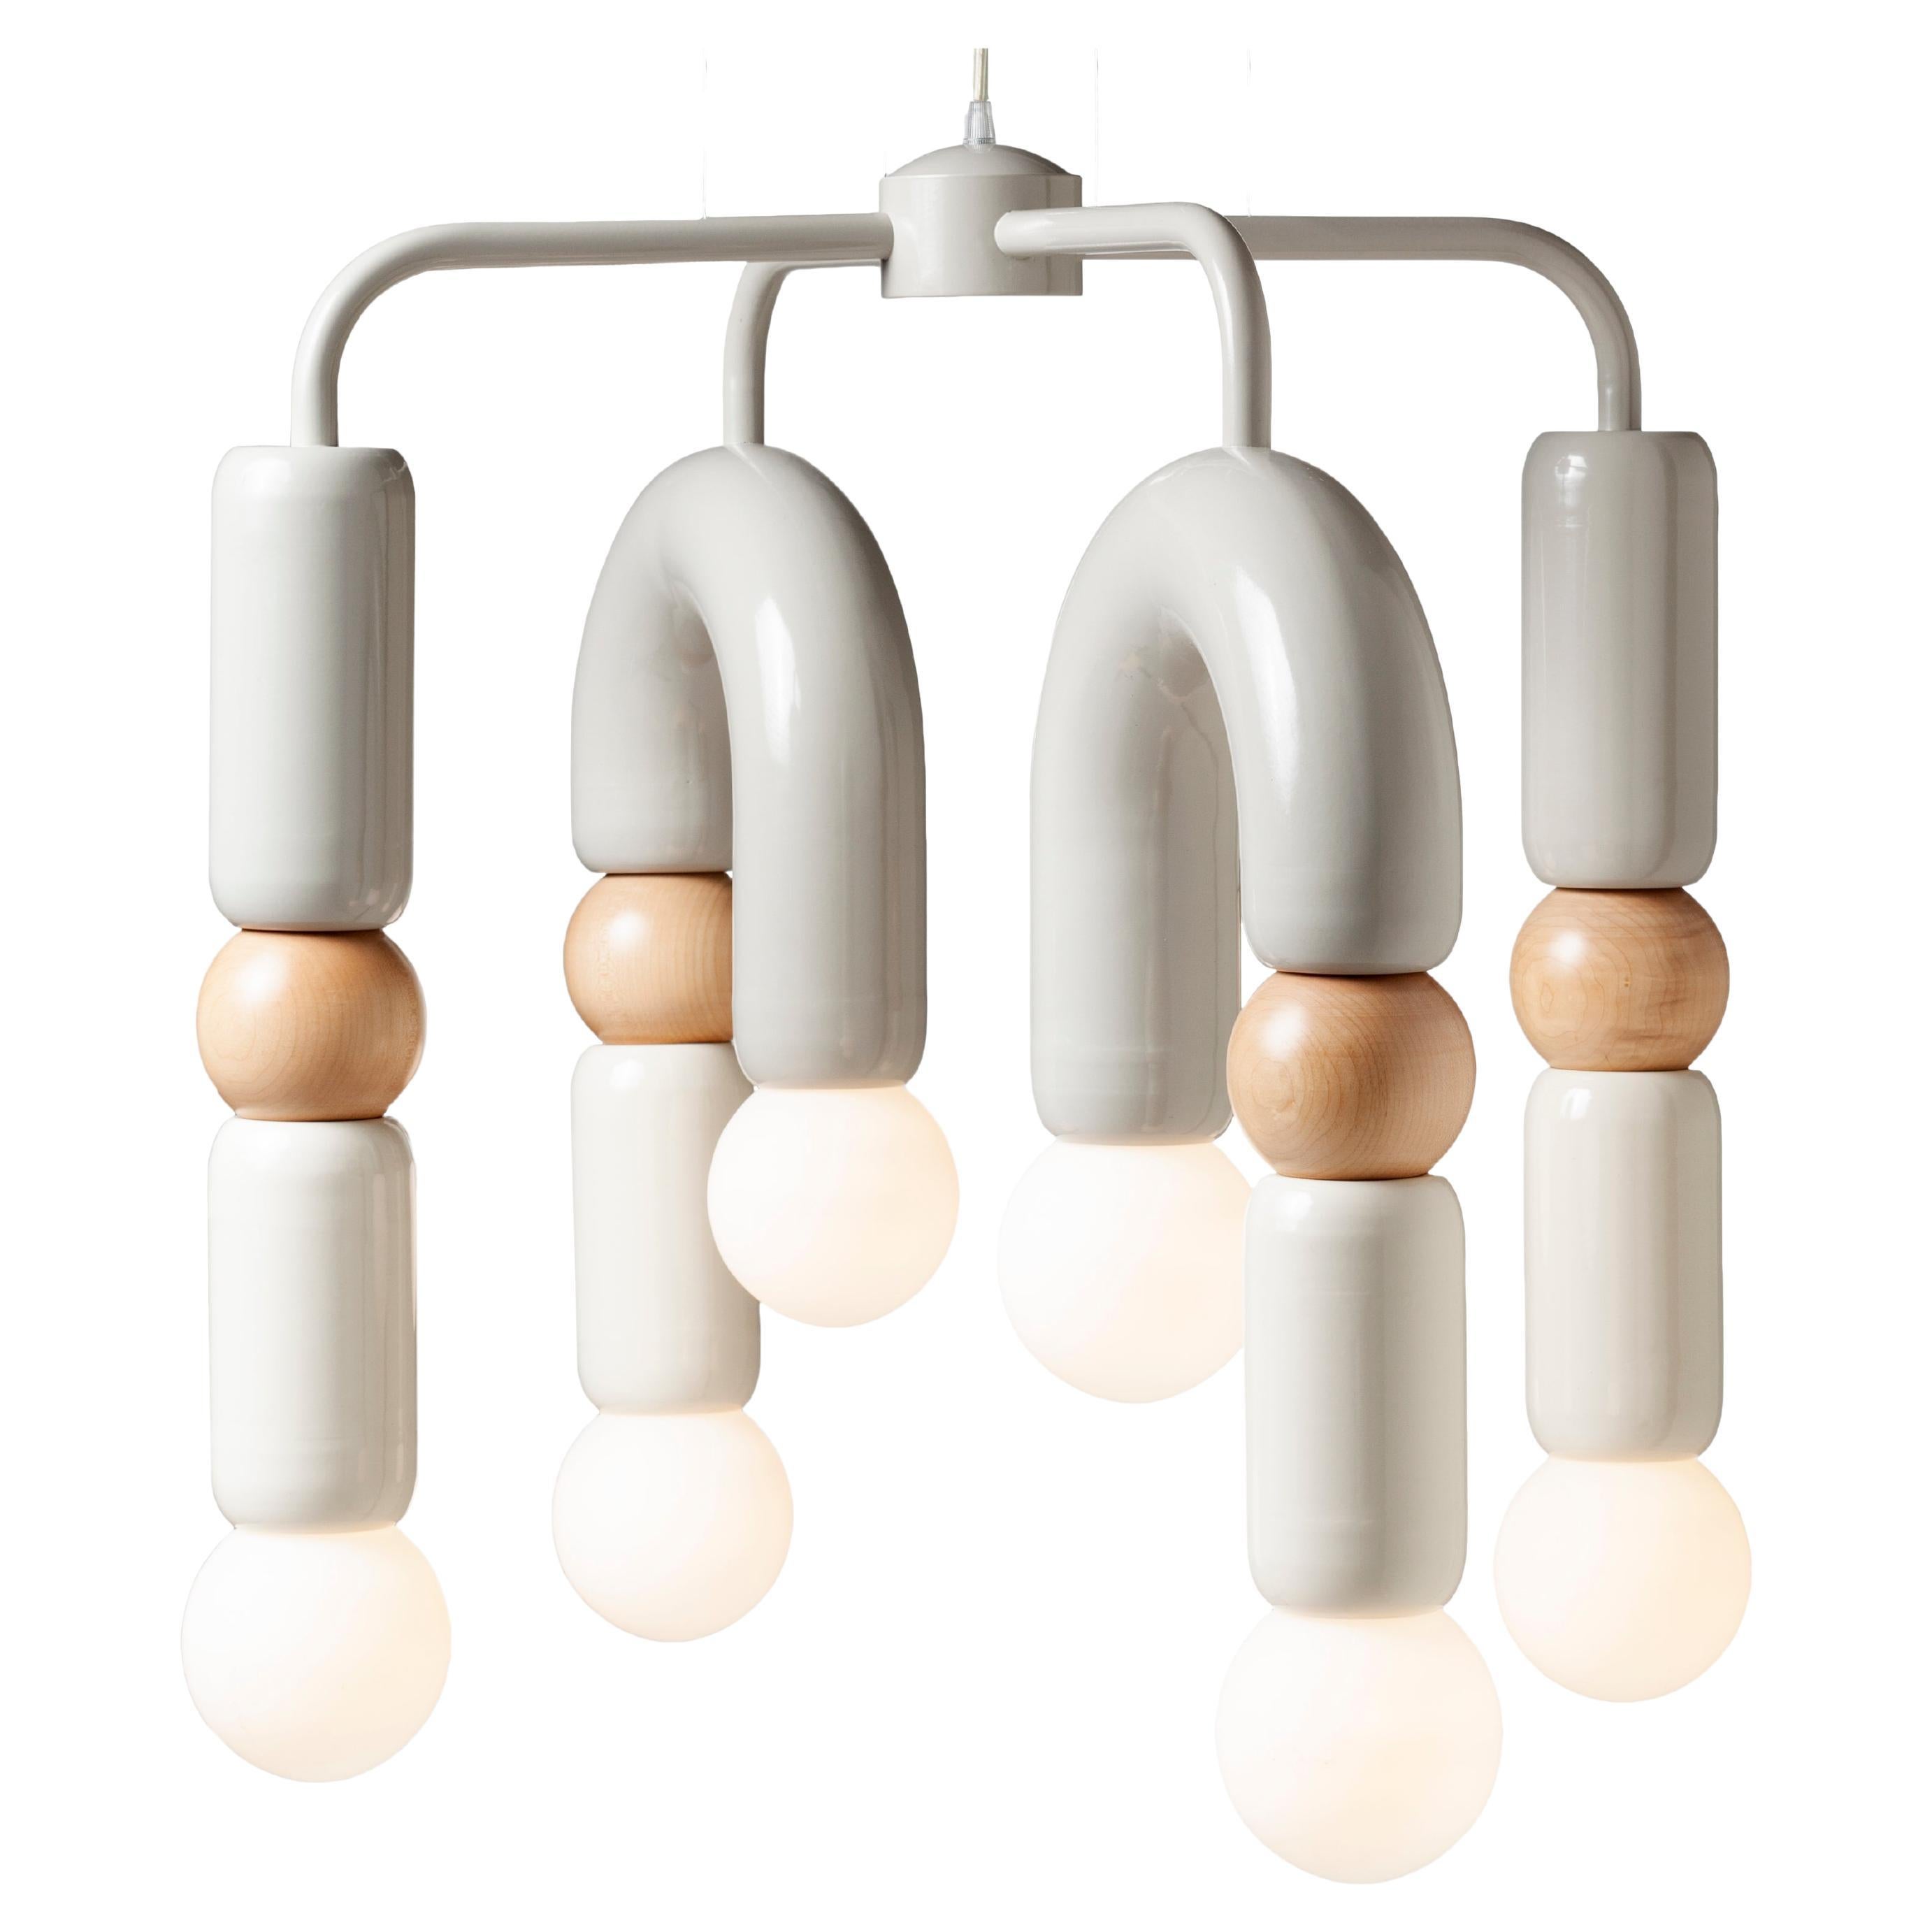 Contemporary Art Deco Pendant Lamp Play IV in Taupe, Ivory & Natural Oak by UTU For Sale